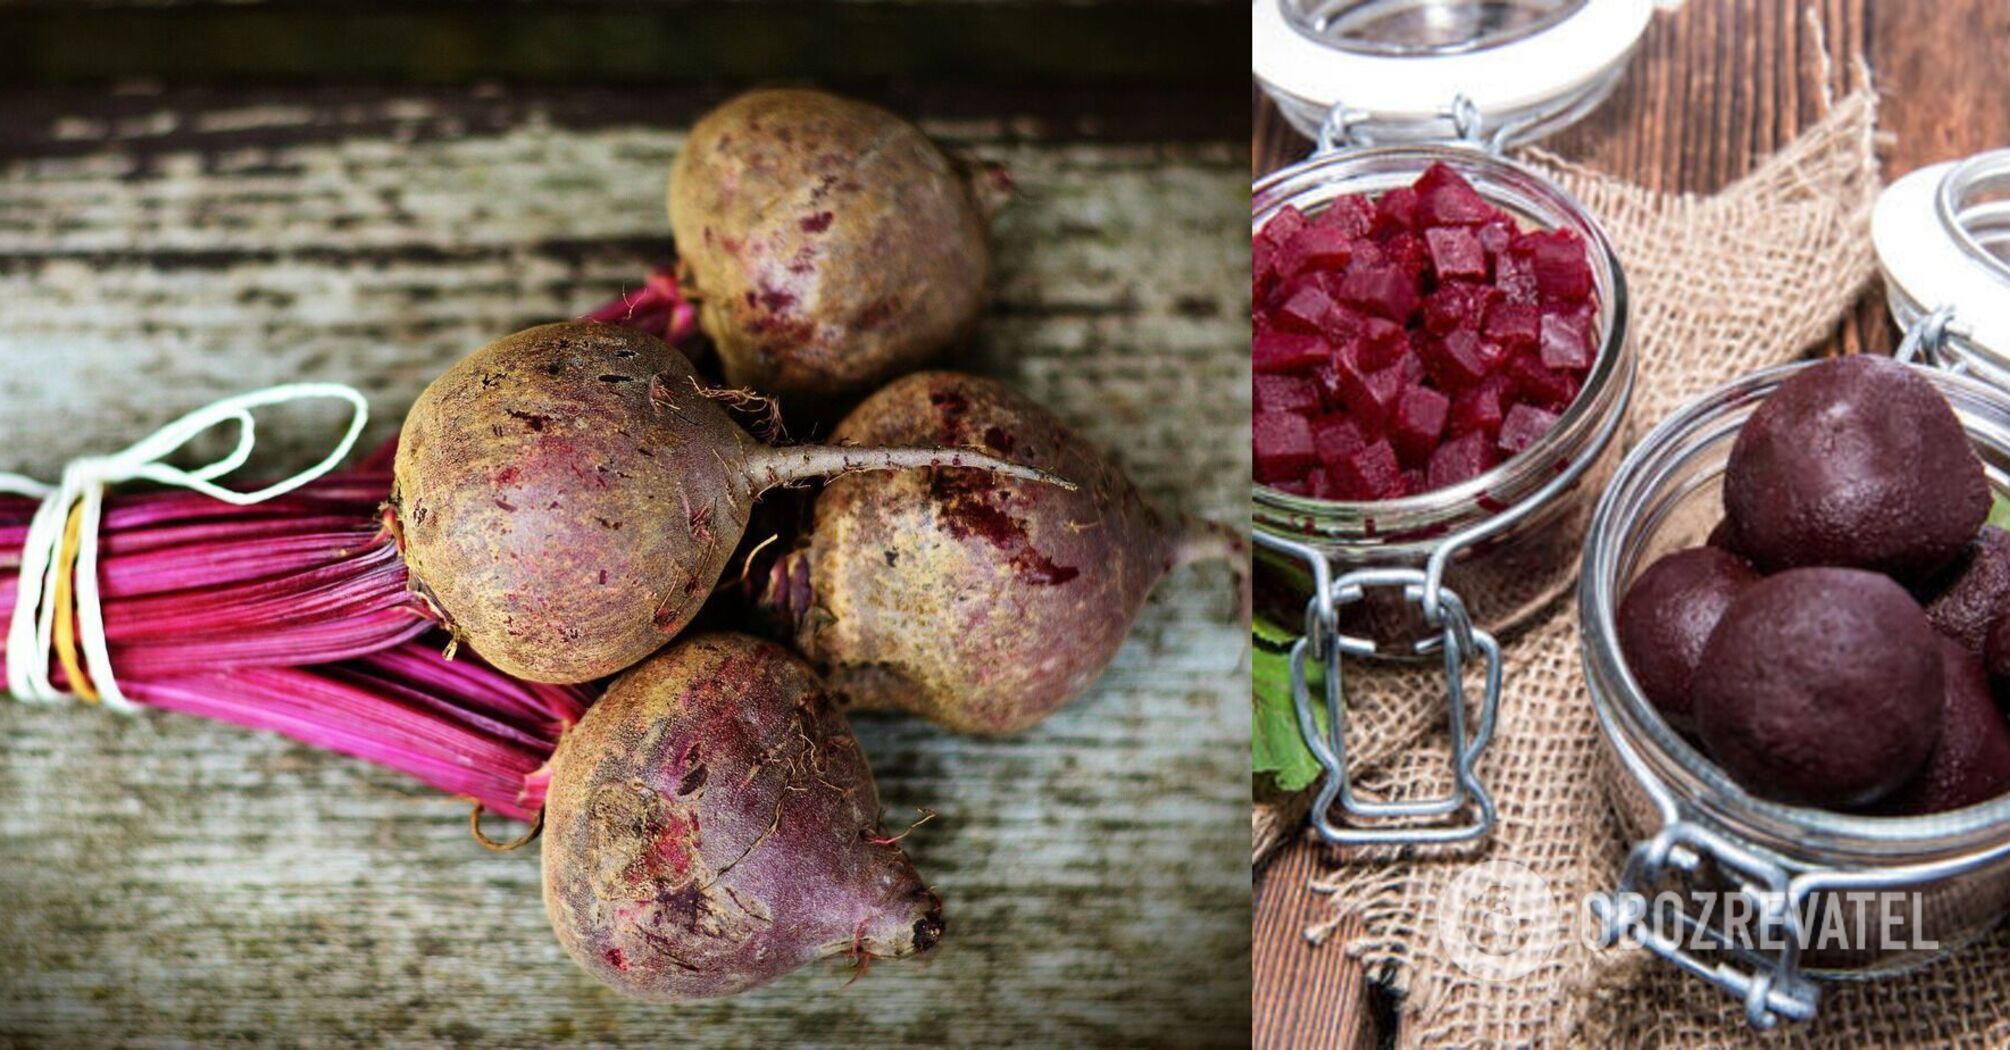 How to quickly boil beets without getting your hands and dishes dirty: an elementary life hack